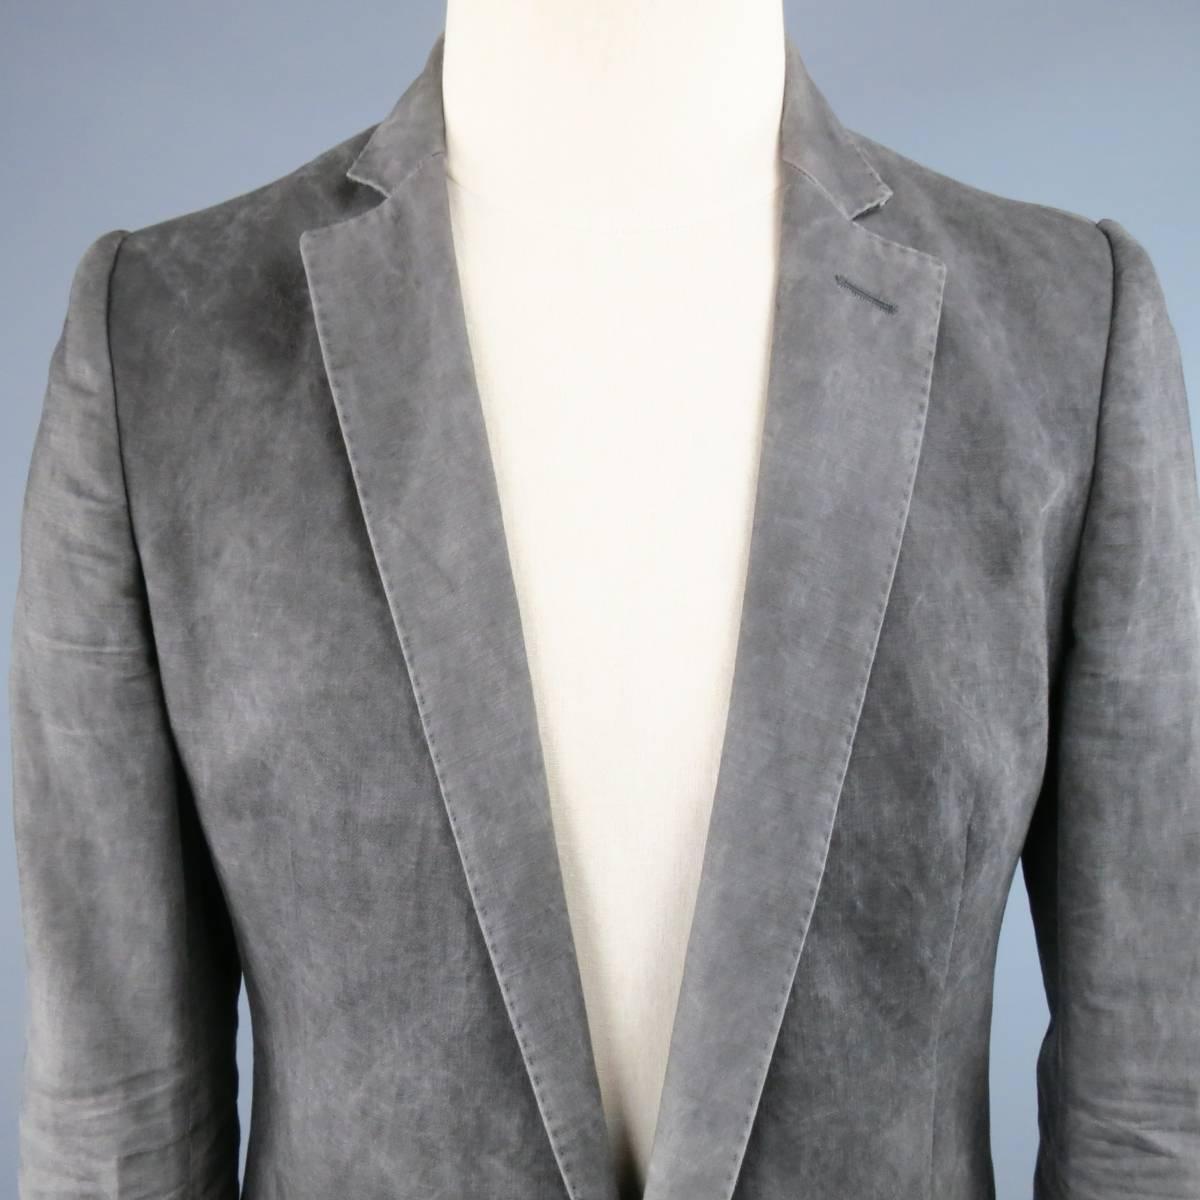 POEME BOHEMIEN sport coat comes in a washed dye gray cotton linen blend fabric featuring a slim notch lapel with top stitching, single button closure, and functional button sleeves. Made in Italy.
 
Excellent Pre-Owned Condition.
 
Measurements:
